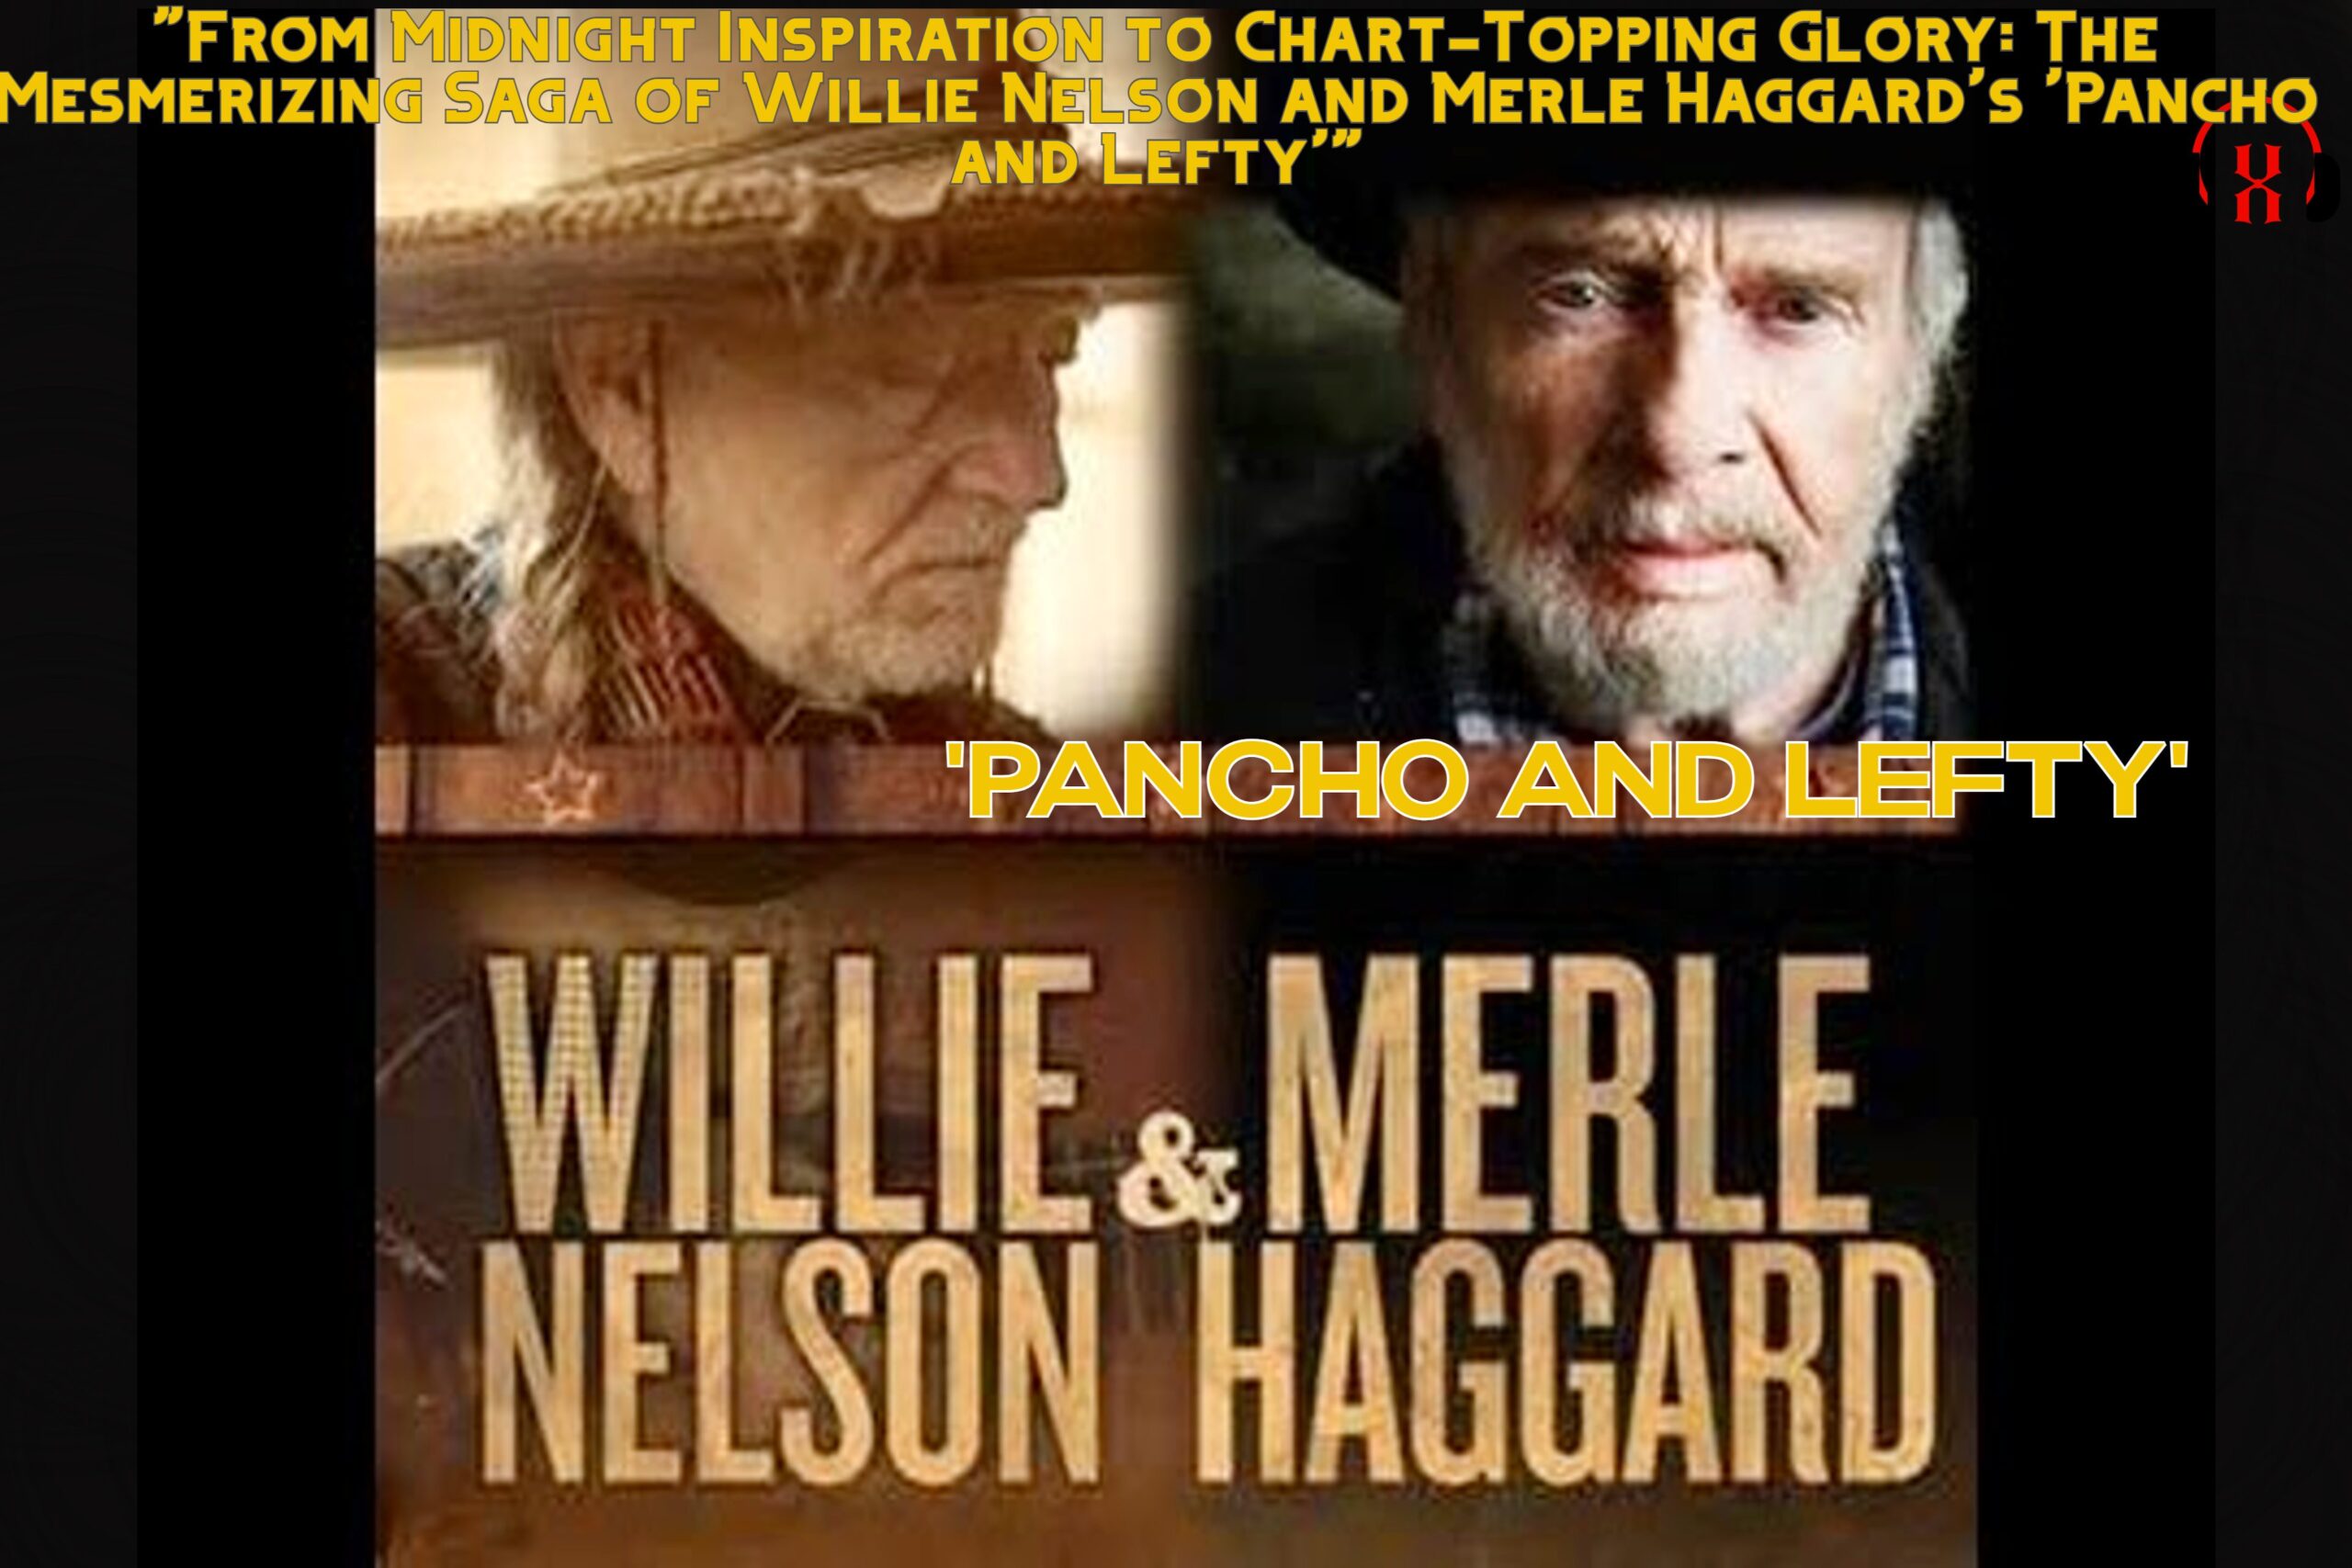 “From Midnight Inspiration to Chart-Topping Glory: The Mesmerizing Saga of Willie Nelson and Merle Haggard’s ‘Pancho and Lefty'”